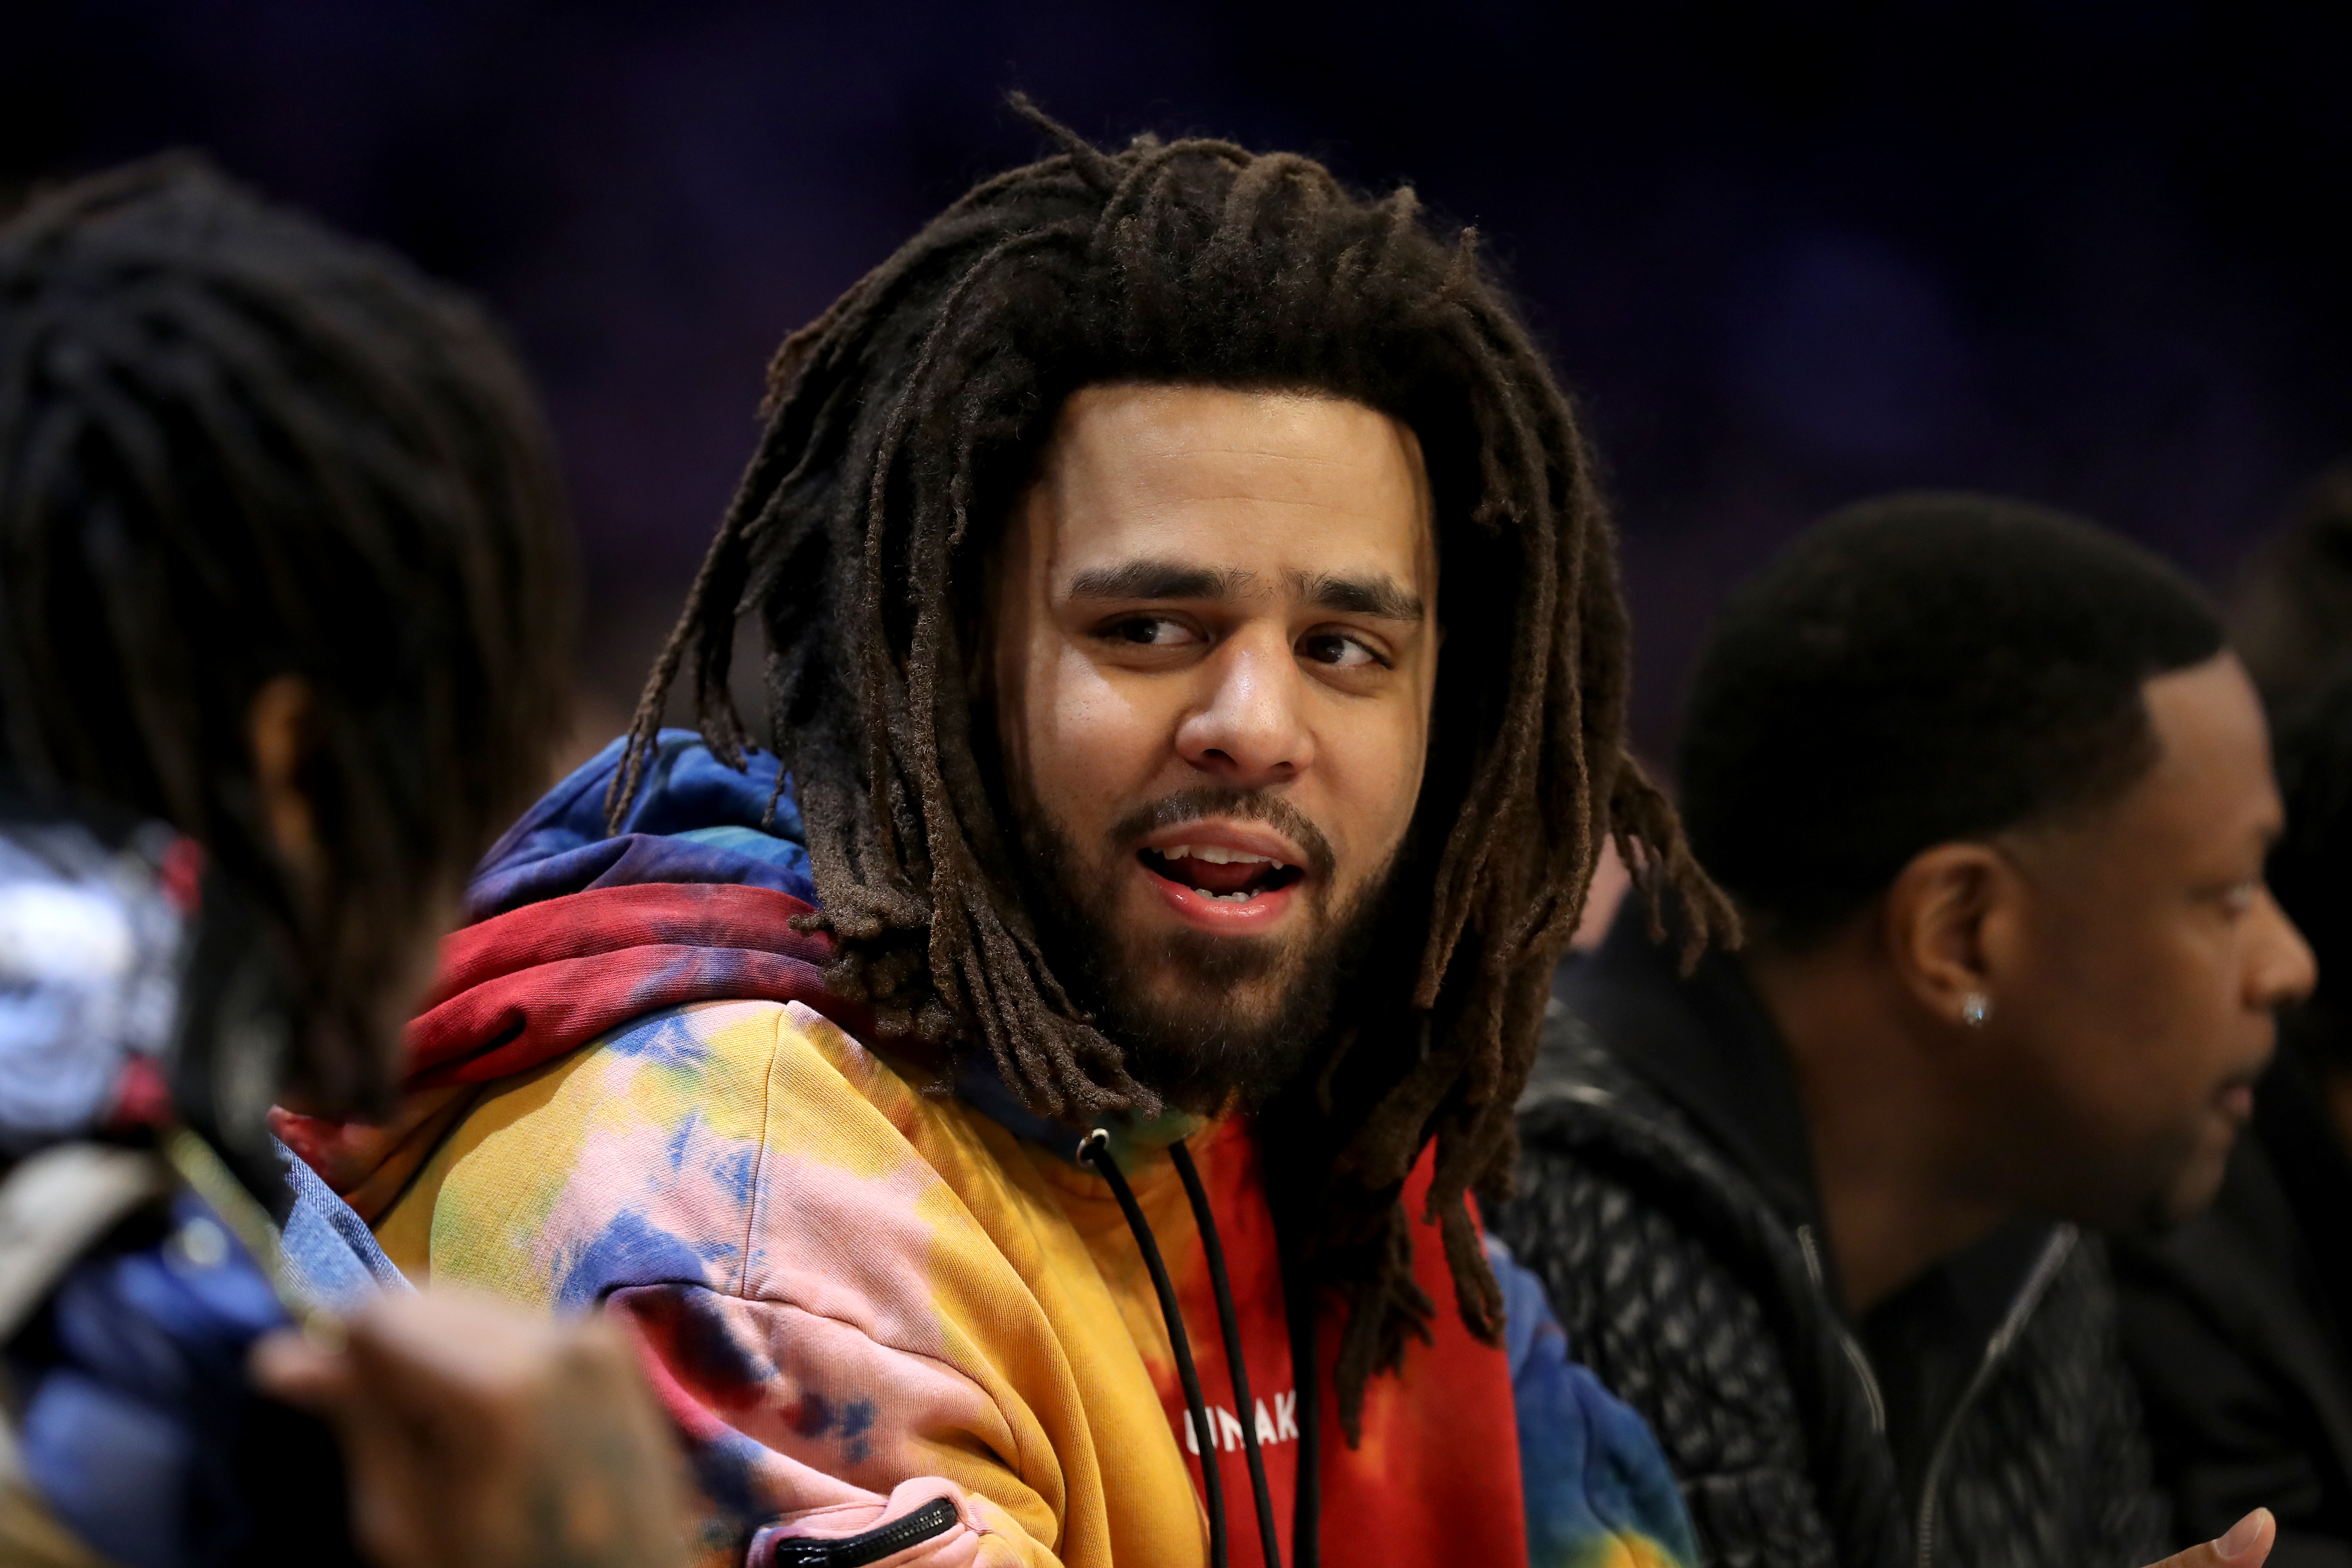 J. Cole Snaps During Freestyle In “ROTD3” BTS Documentary Footage